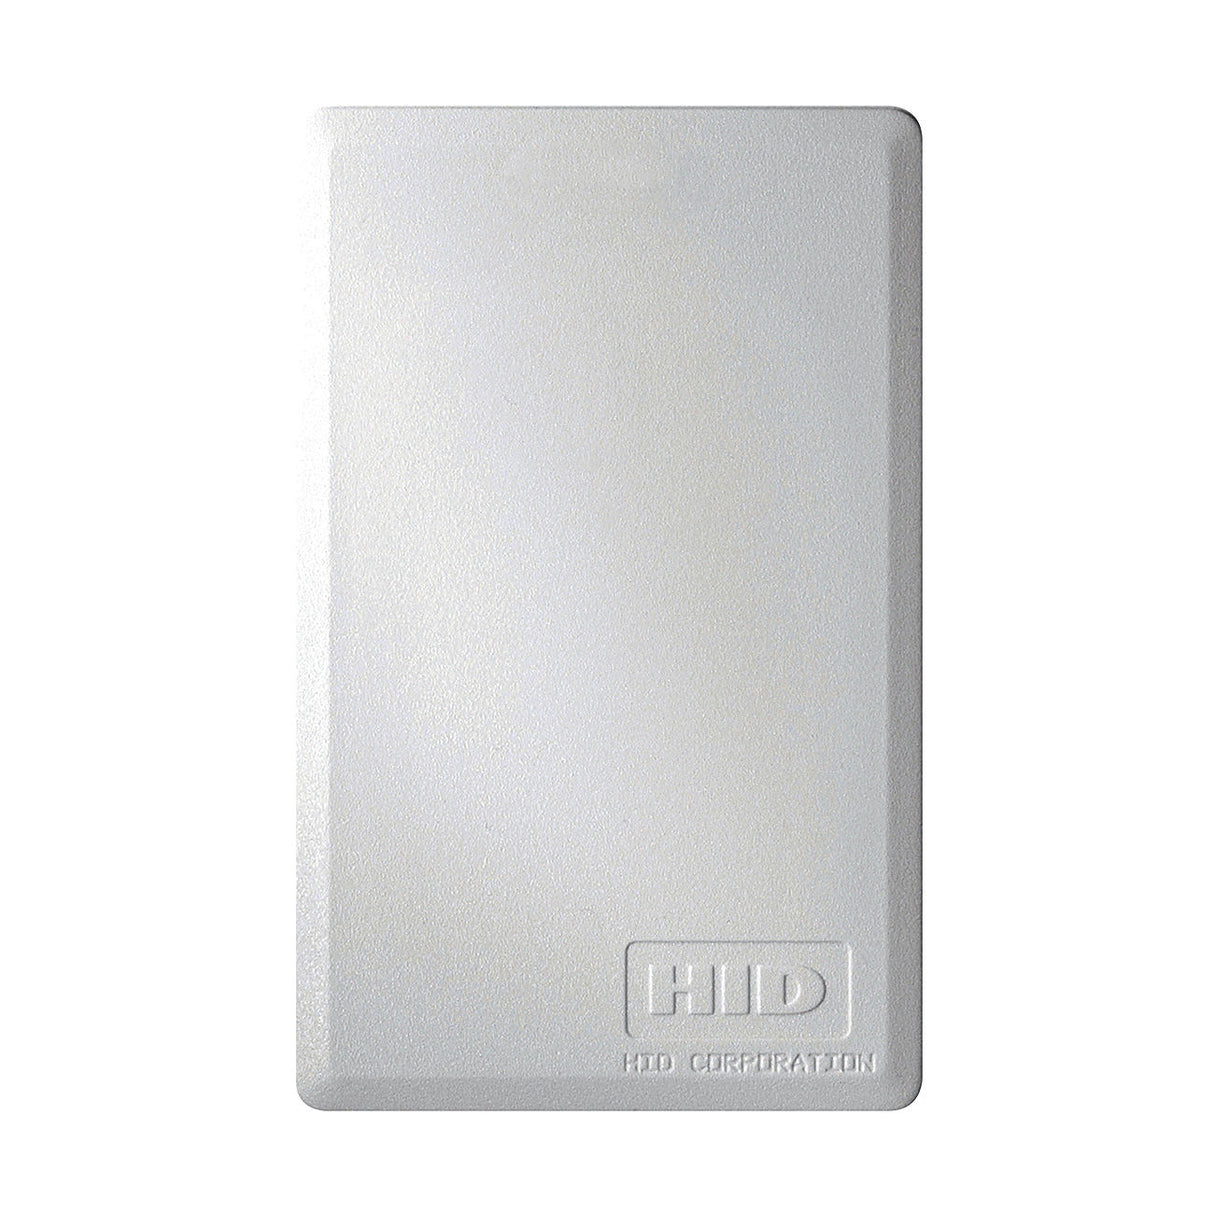 Security Brands 40-010 Clamshell Card HID (Qty 50)